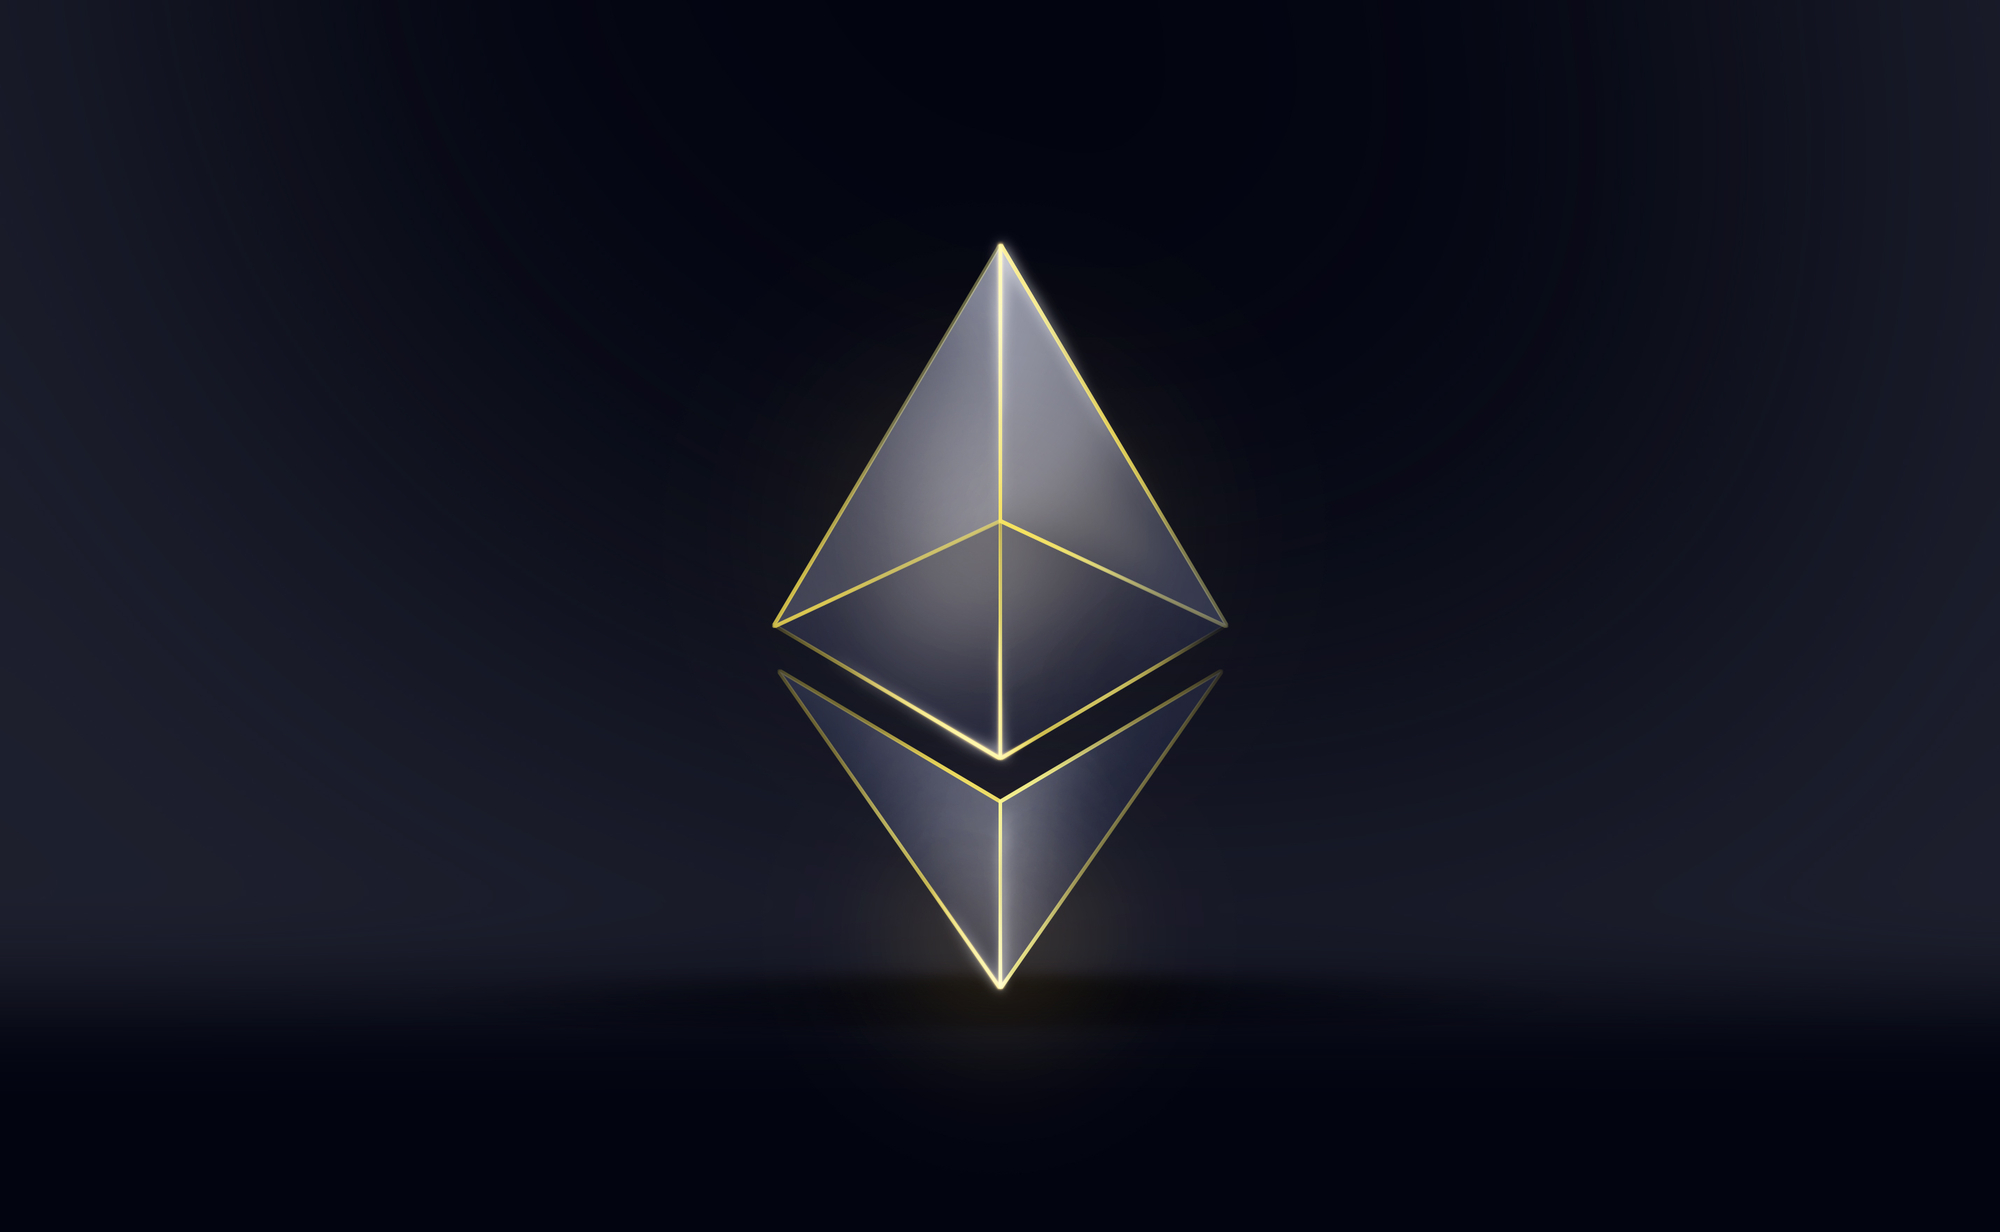 Analysts from Bernstein predicted that the price of Ethereum could rise to $6600